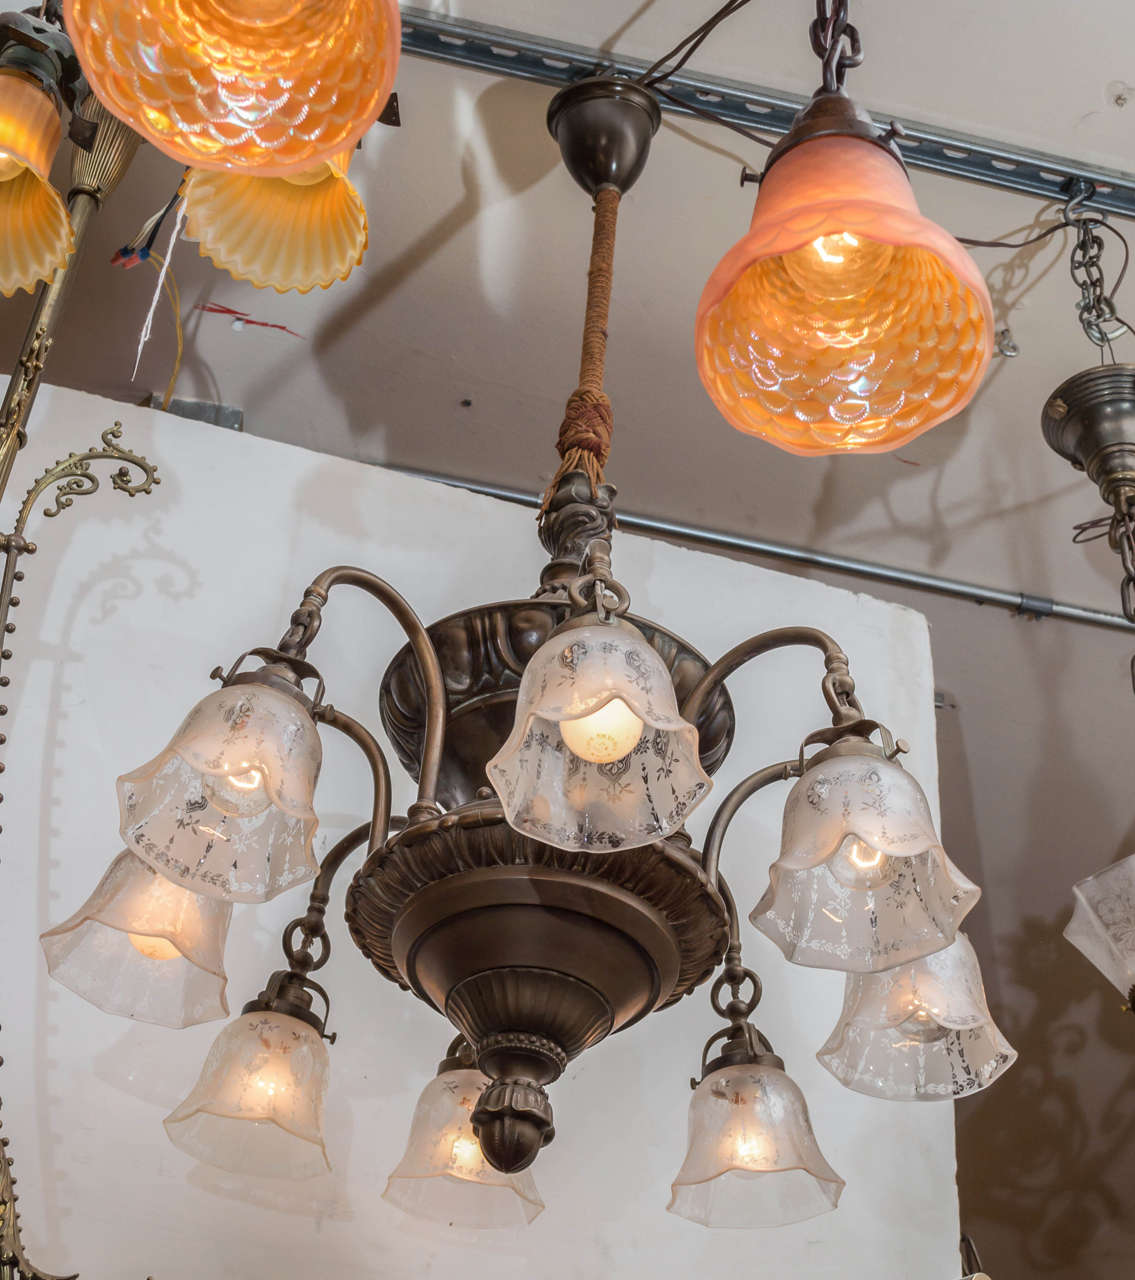 For those who complain about not enough light in an area, here we have a hard to find eight-arm chandelier. The warmly patinated bronze body is accompanied by a matched set of period stencil etched glass shades. The rope covering the pole is